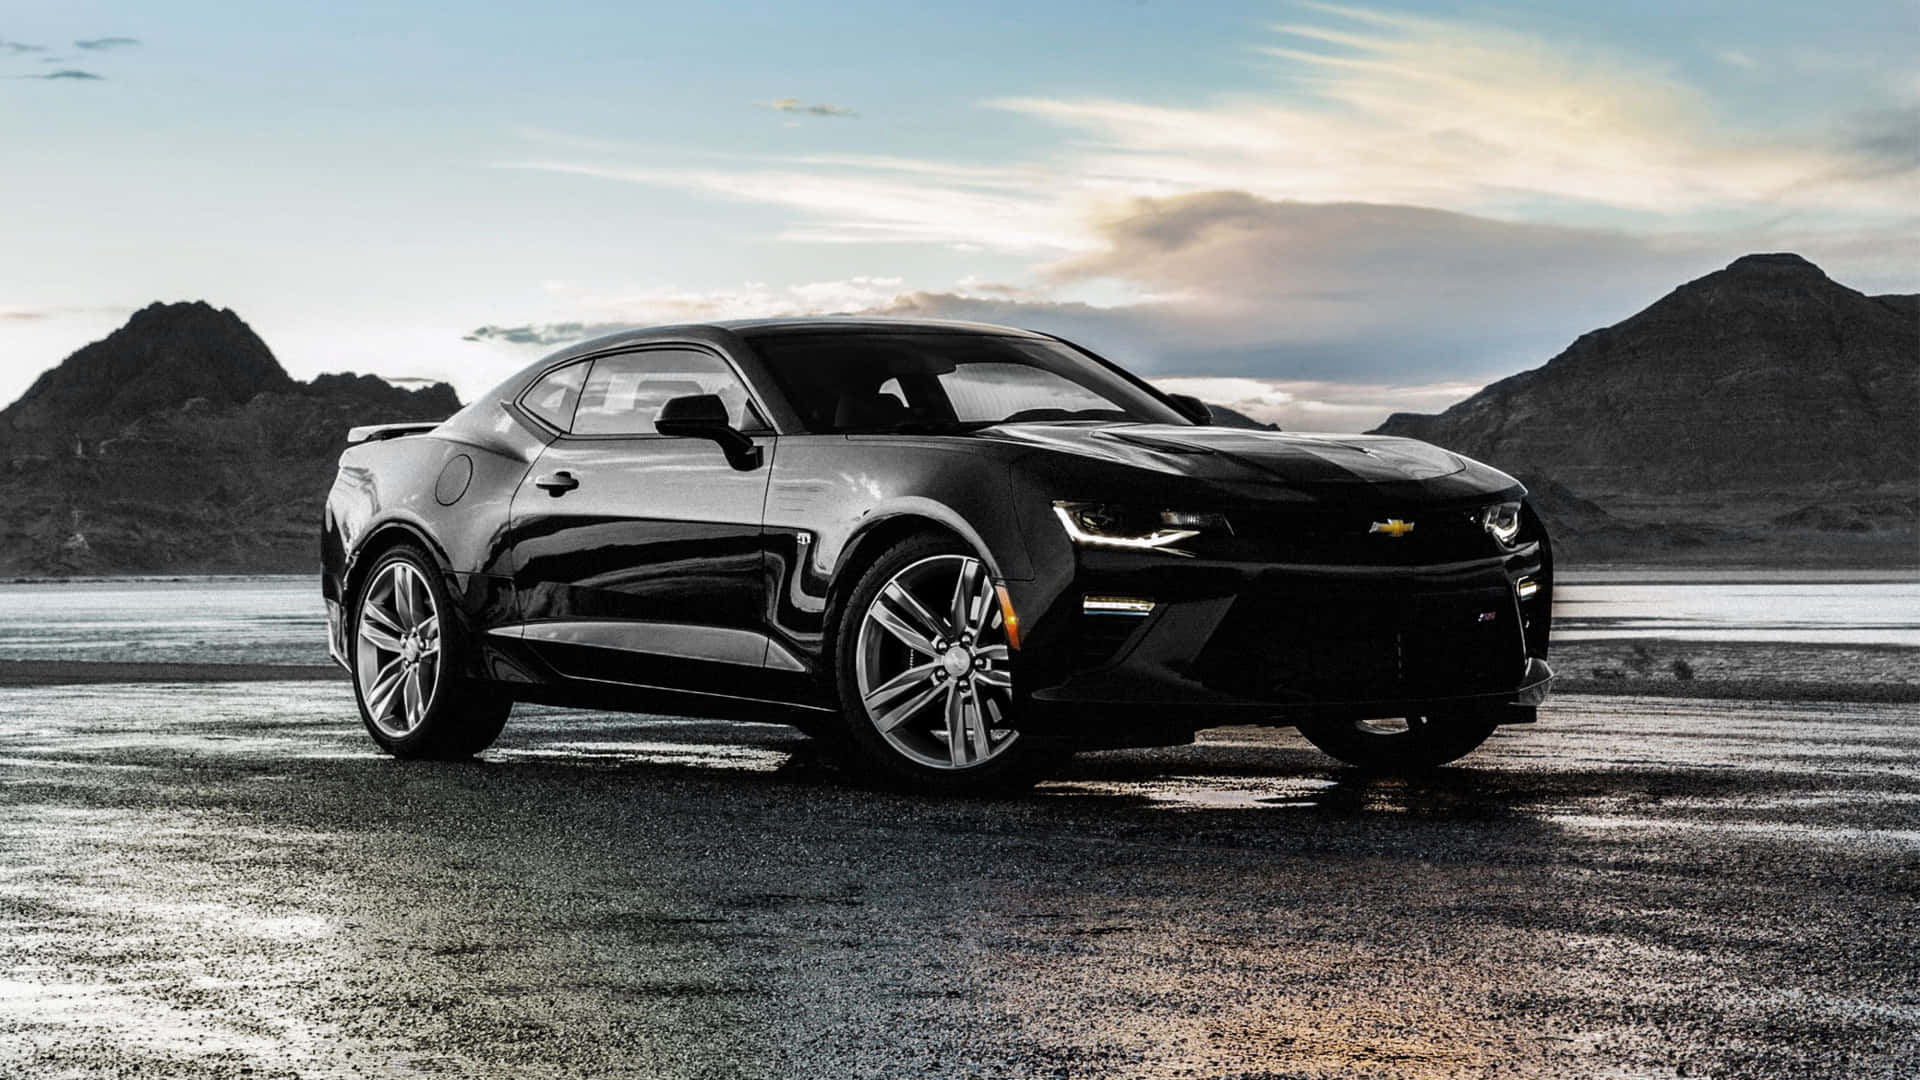 Get Ready To Hit The Road in This Cool Camaro Wallpaper